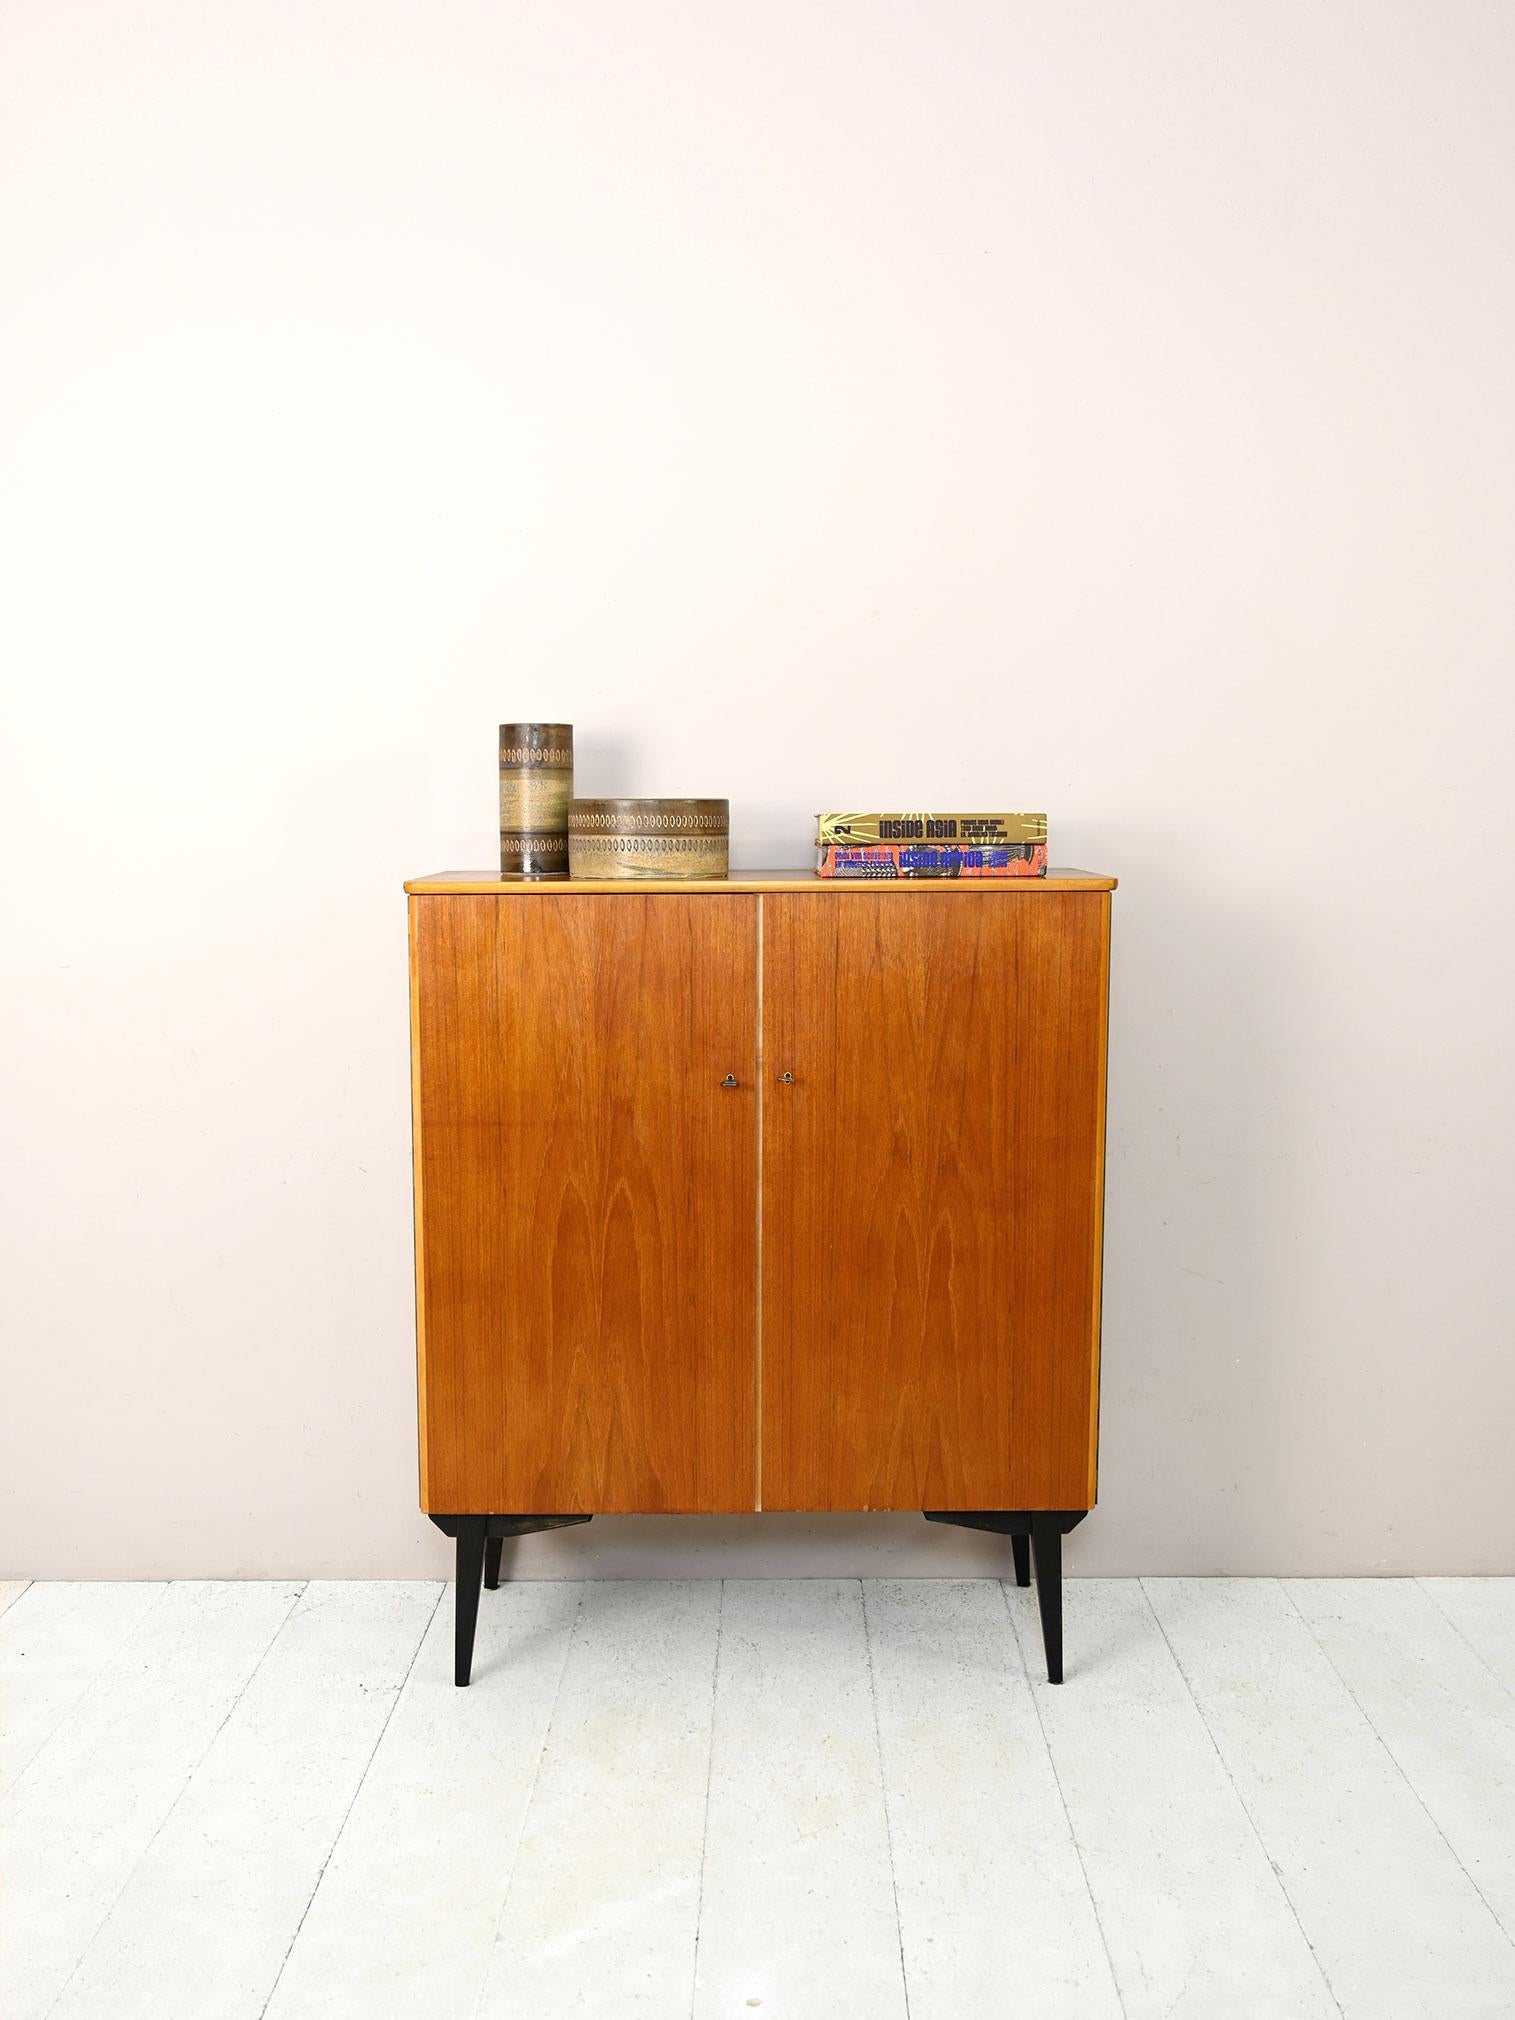 Vintage 1960s teak sideboard with black painted details.

This modern cabinet consists of a compartment equipped with shelves closed by two hinged doors equipped with a lock.
Characterized by simple and essential lines but enriched by some